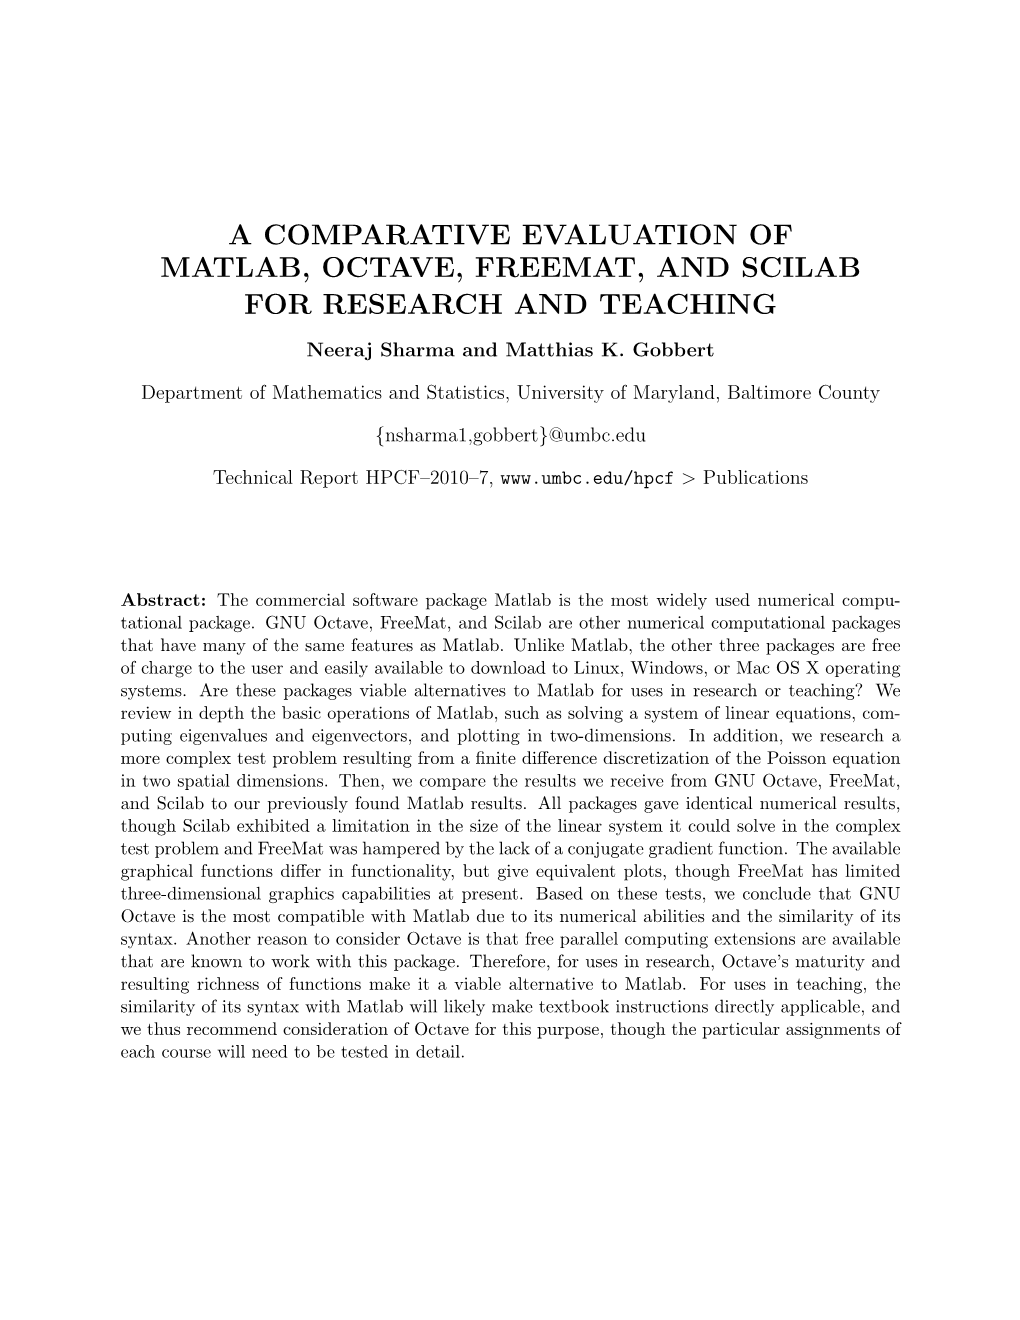 A Comparative Evaluation of Matlab, Octave, Freemat, and Scilab for Research and Teaching